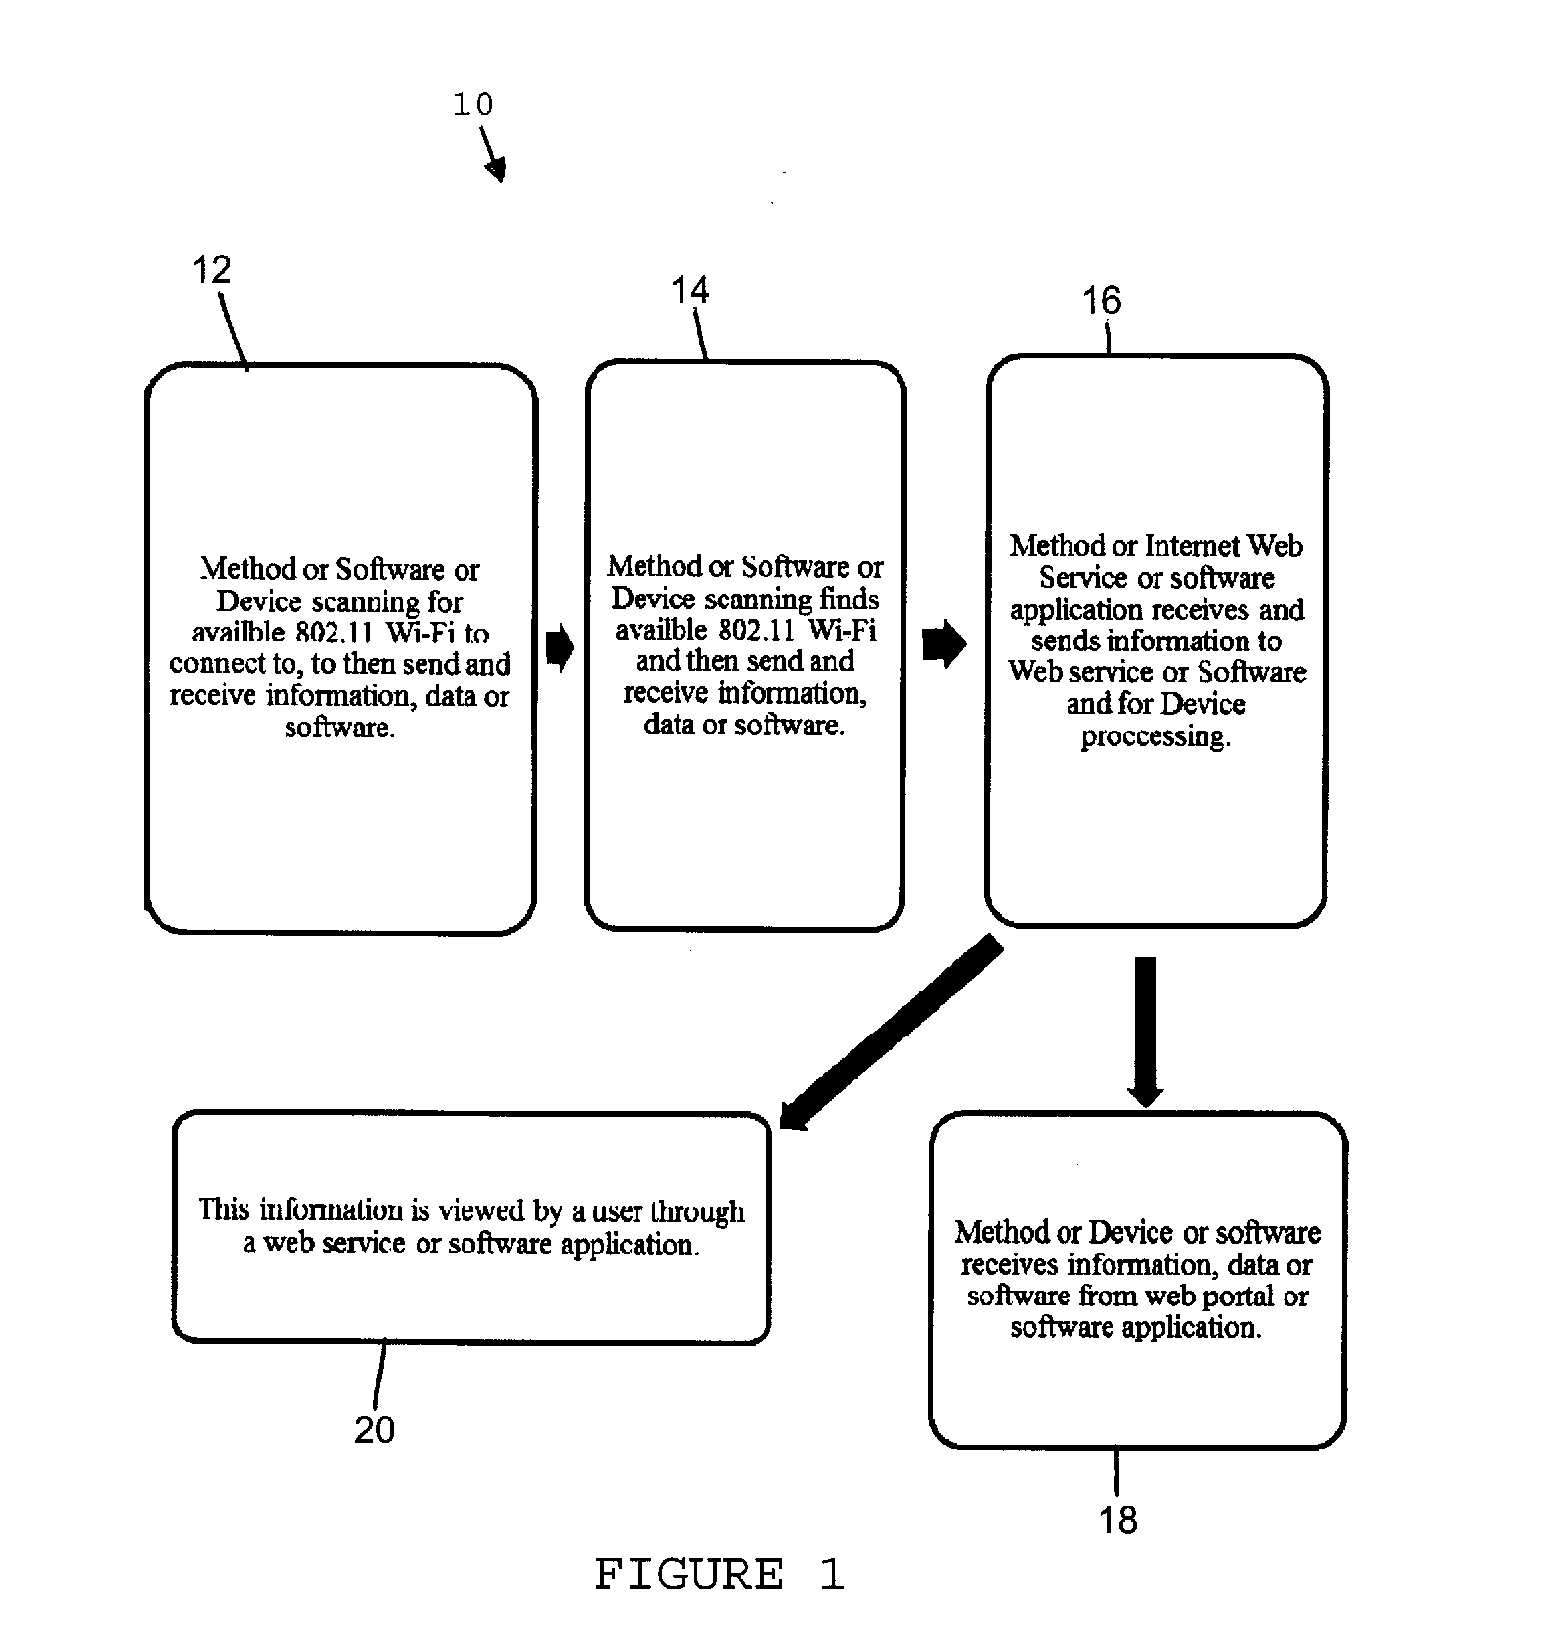 System for connecting to wireless local area networks while in motion to send and receive GPS data and other information to a web portal or software application